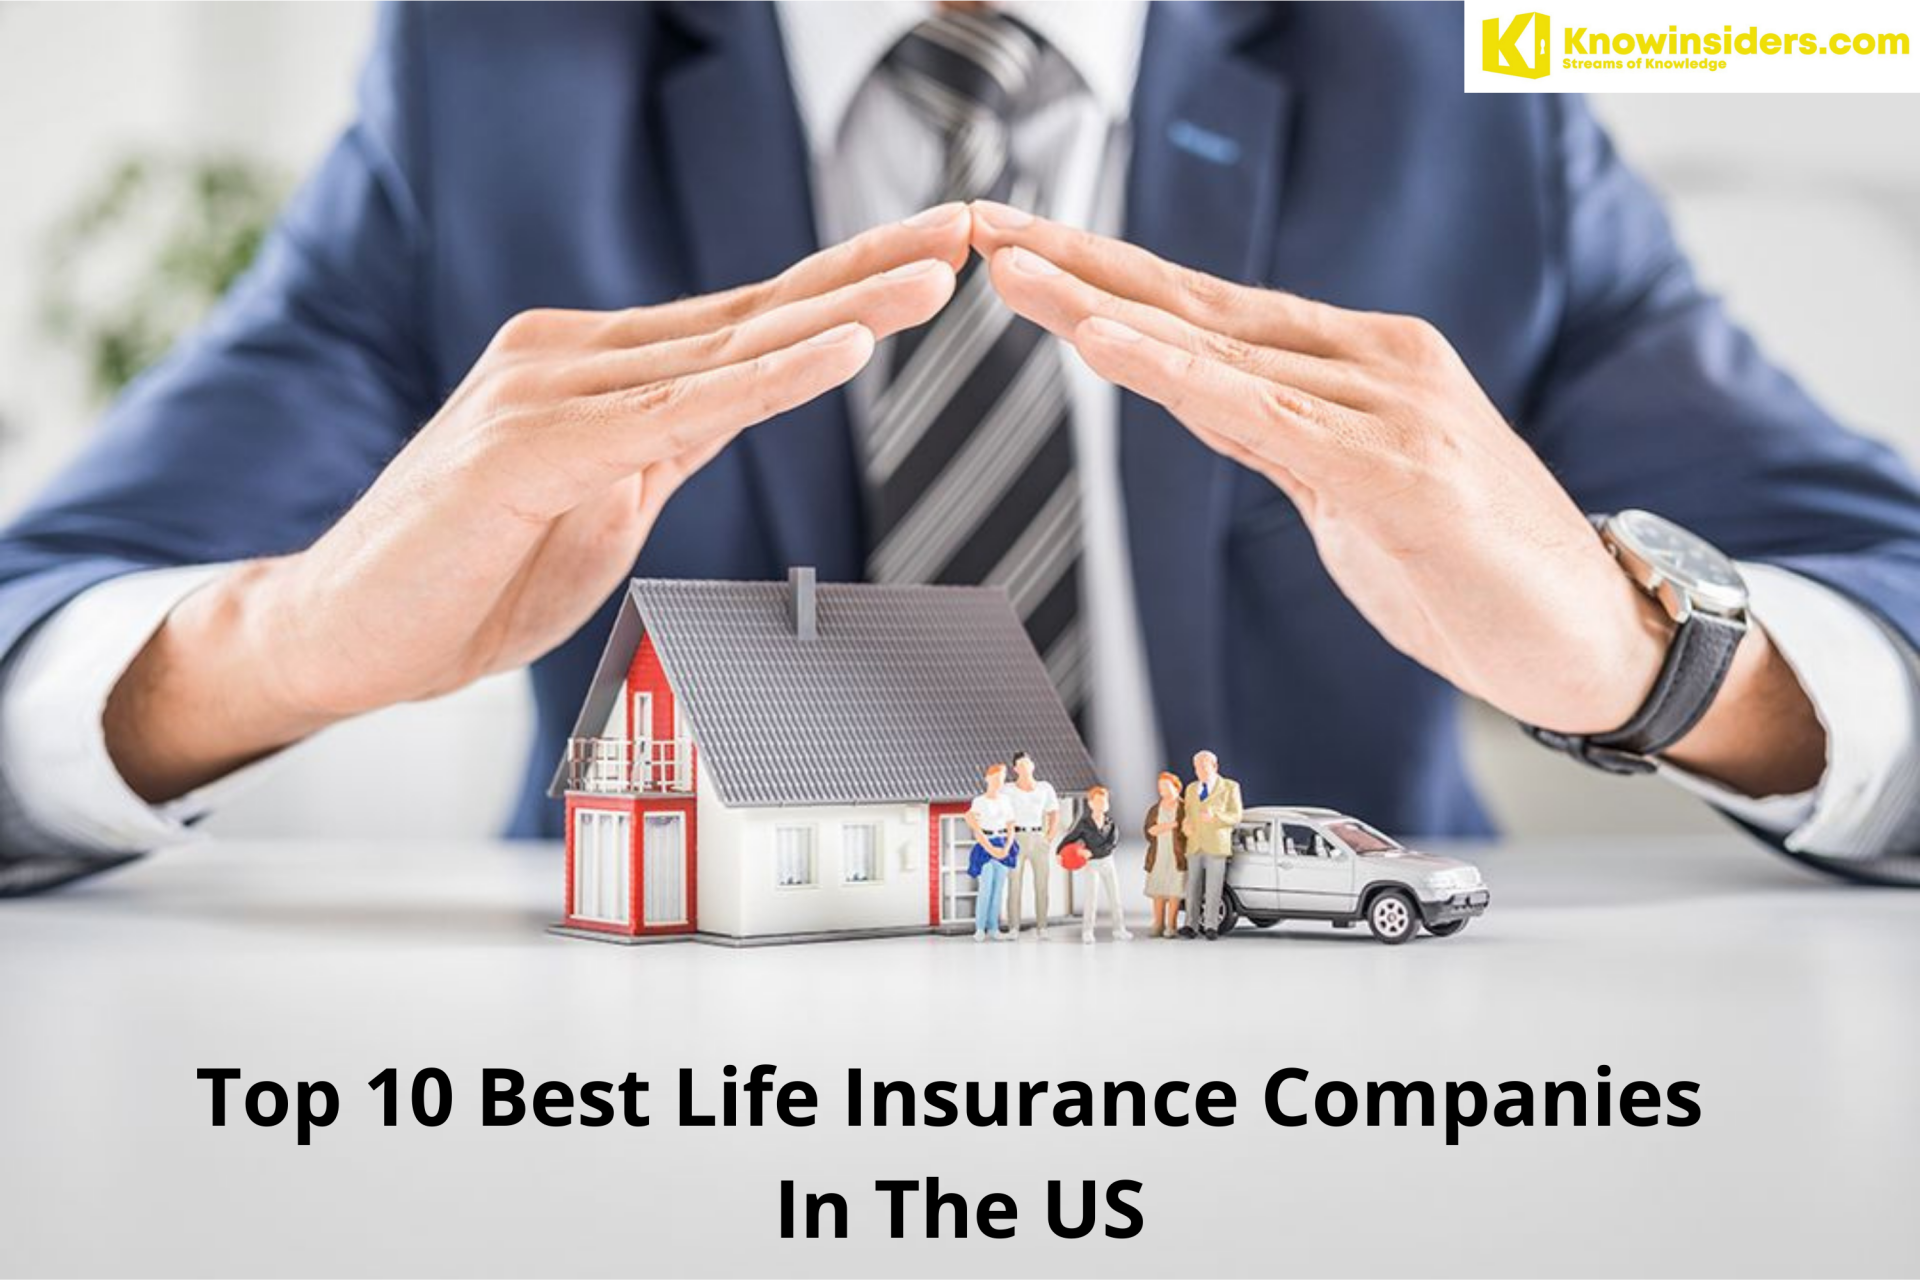 10 Best Life Insurance Companies In The US: Cheapest Quotes and Good Services